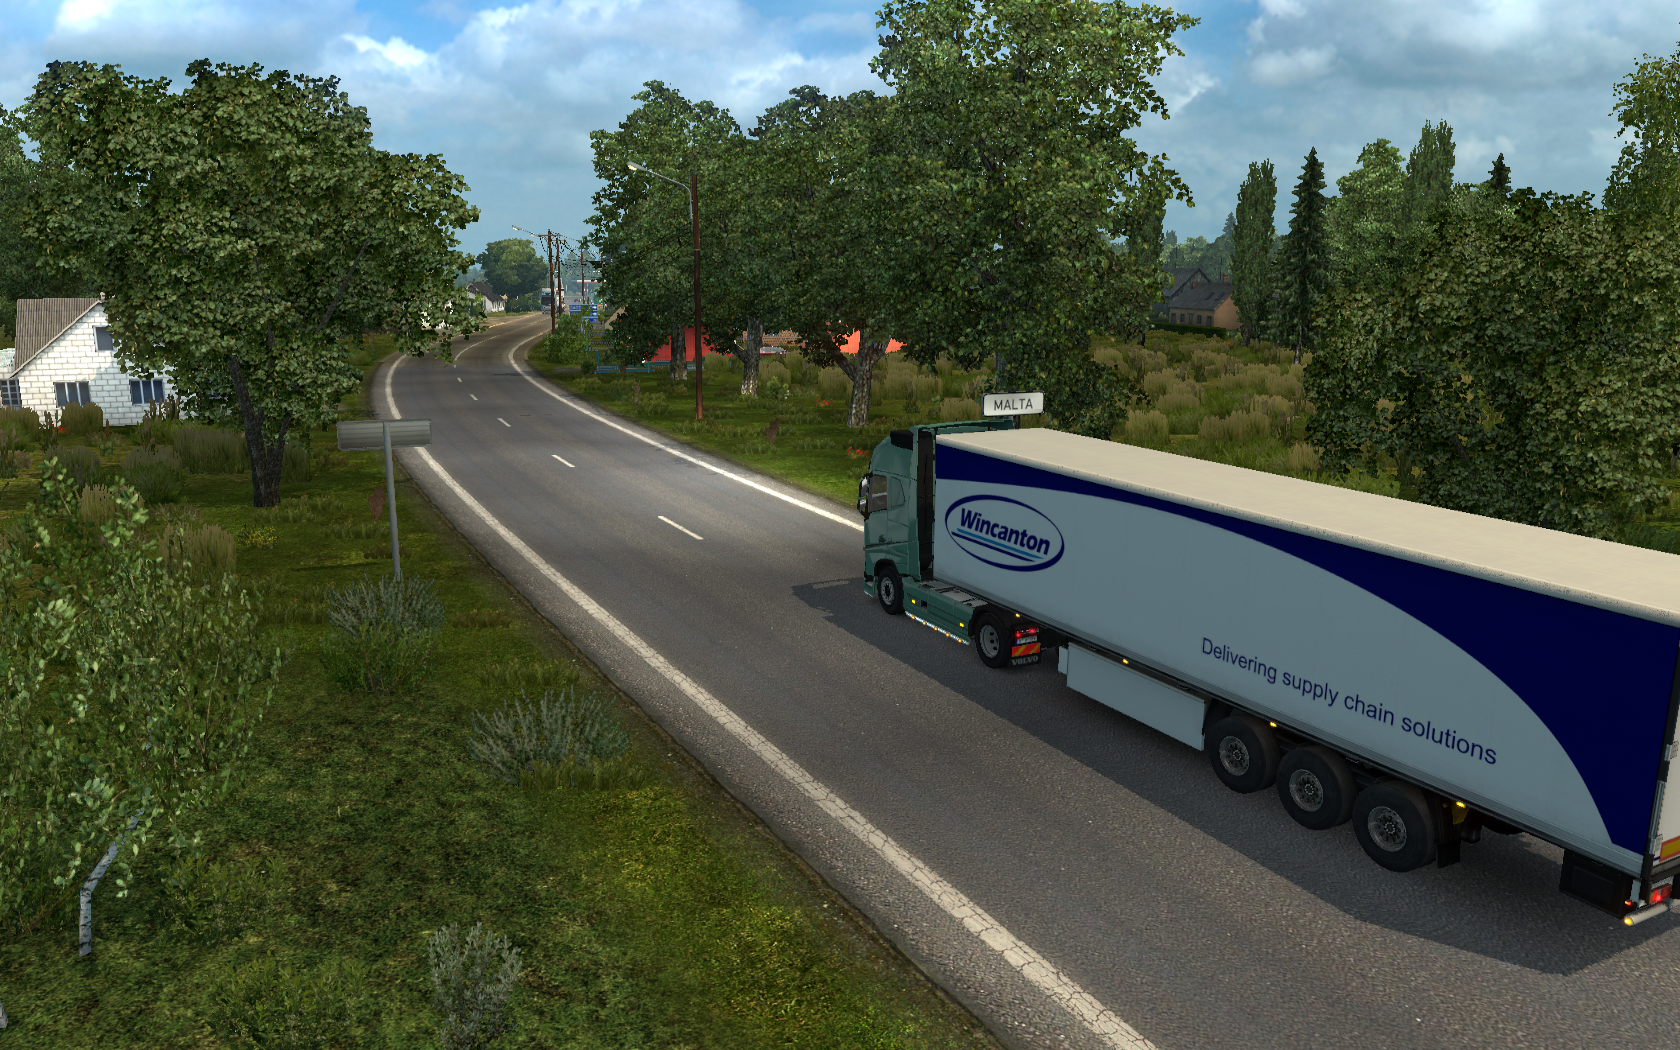 ets2_00098.png